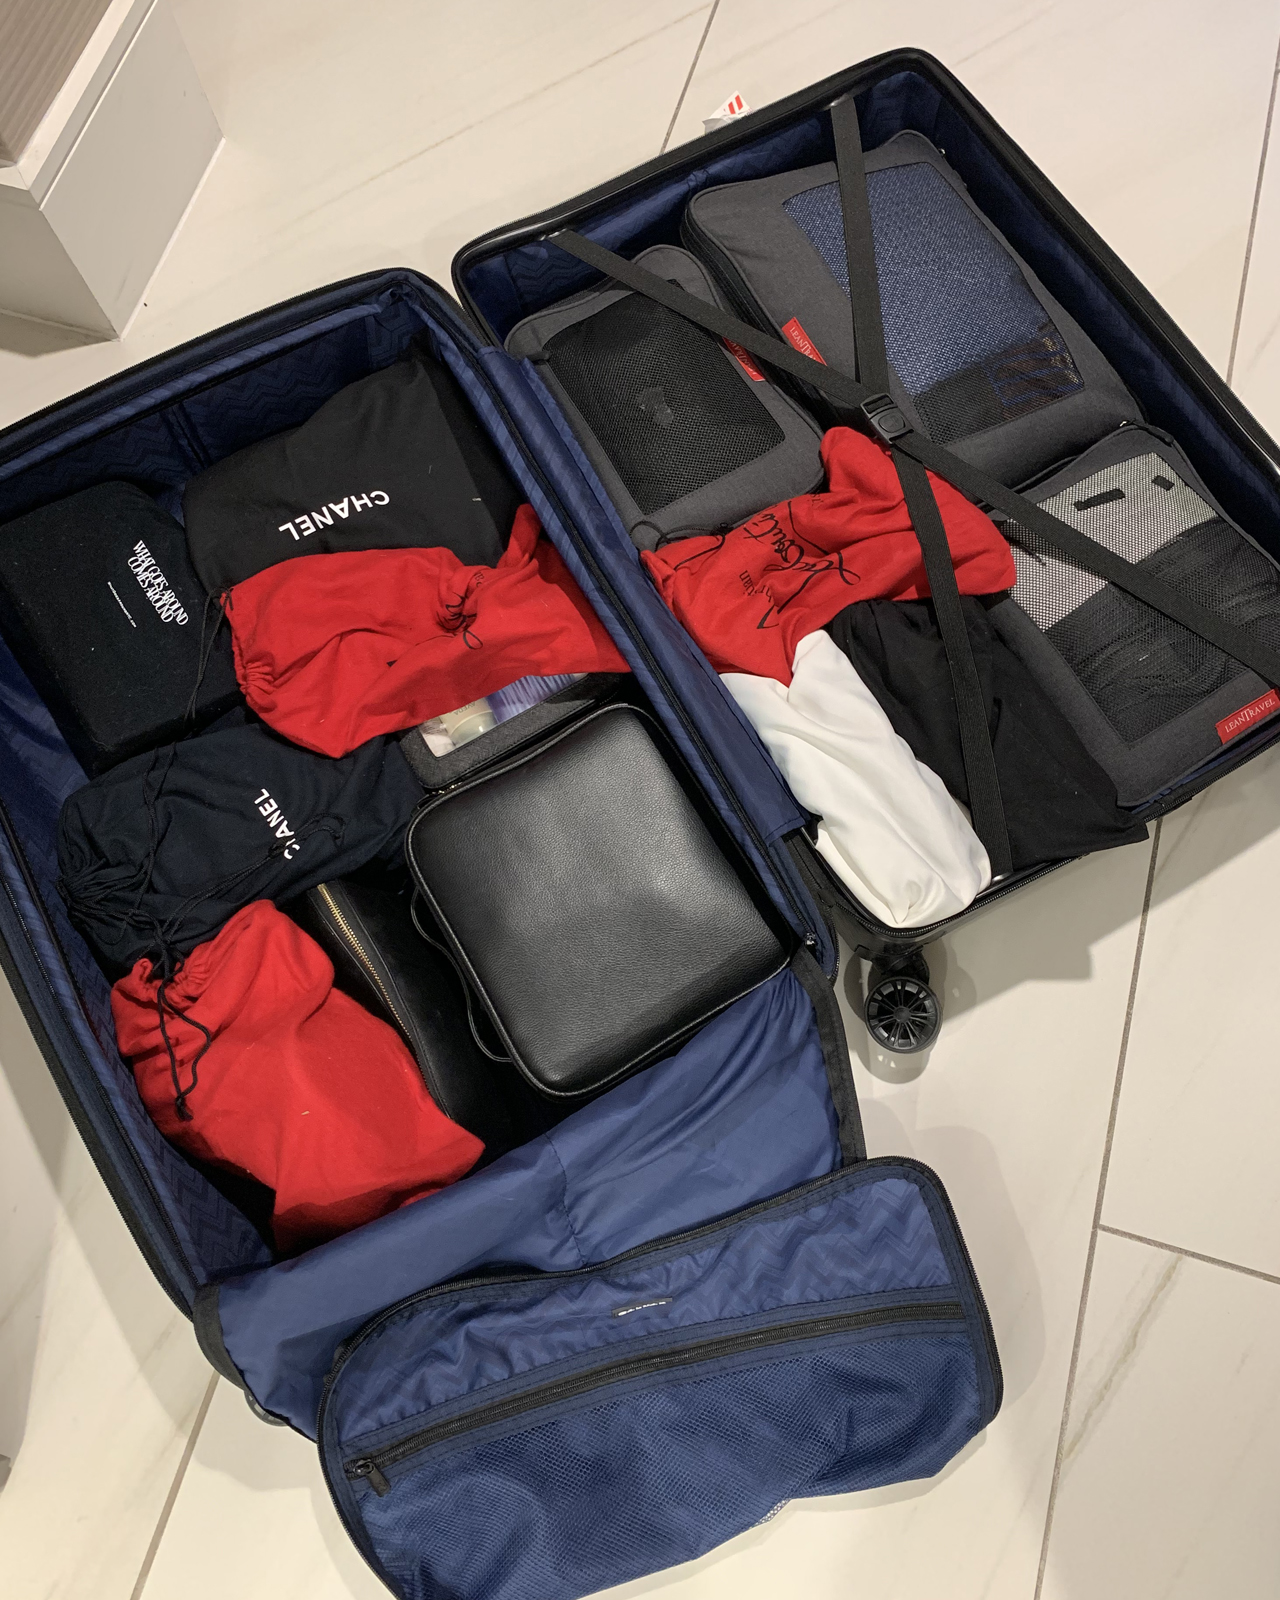 Calpak Luggage with packing cubes